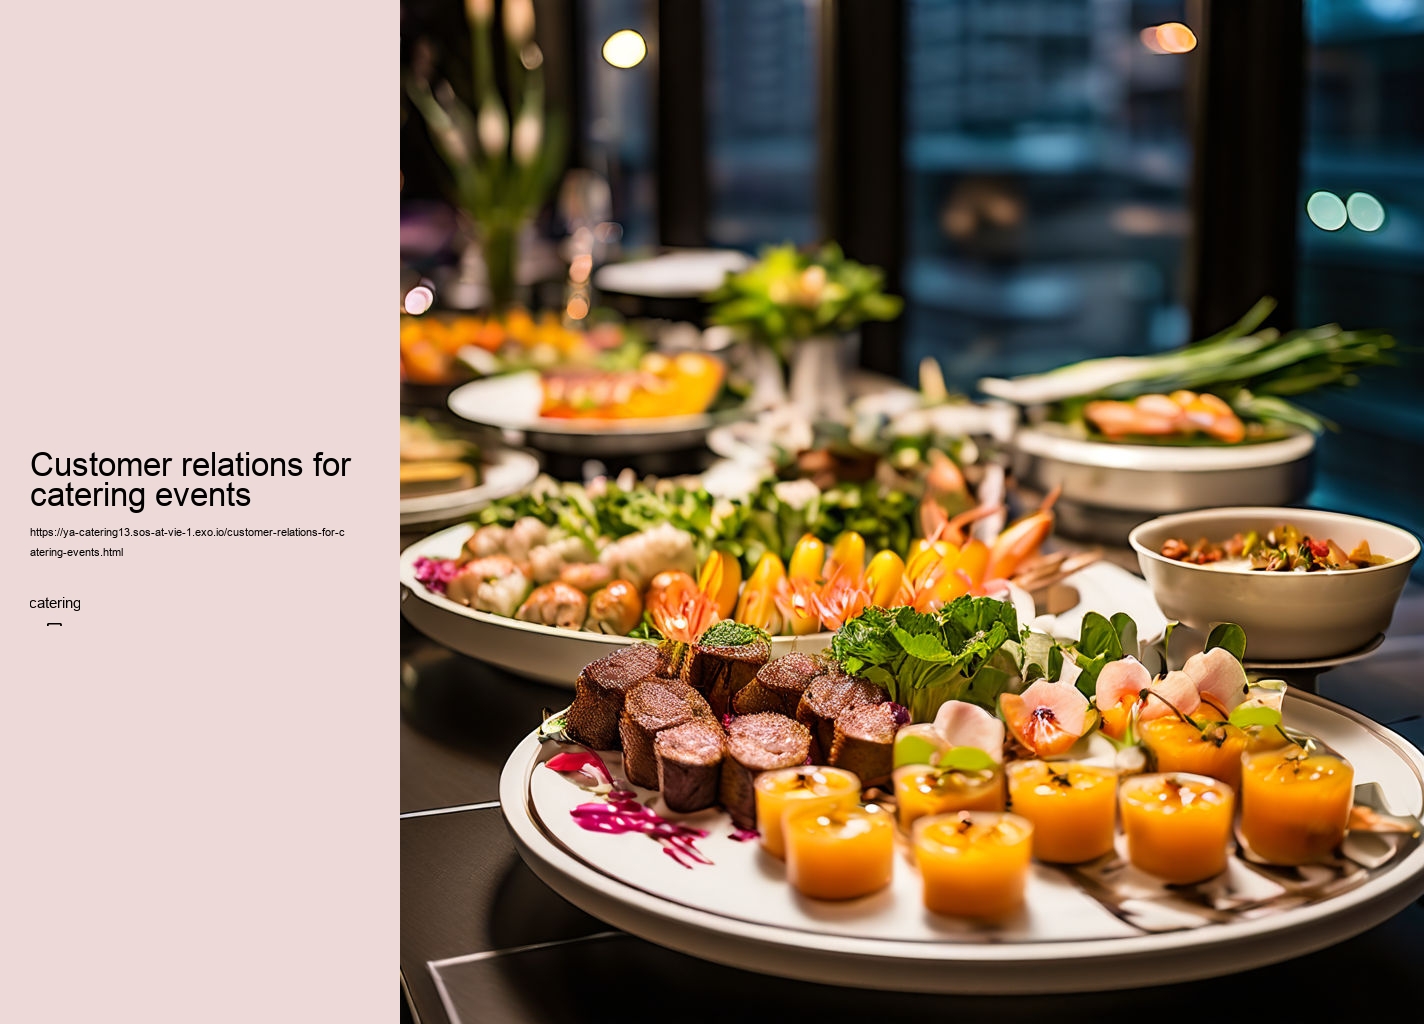 Customer relations for catering events